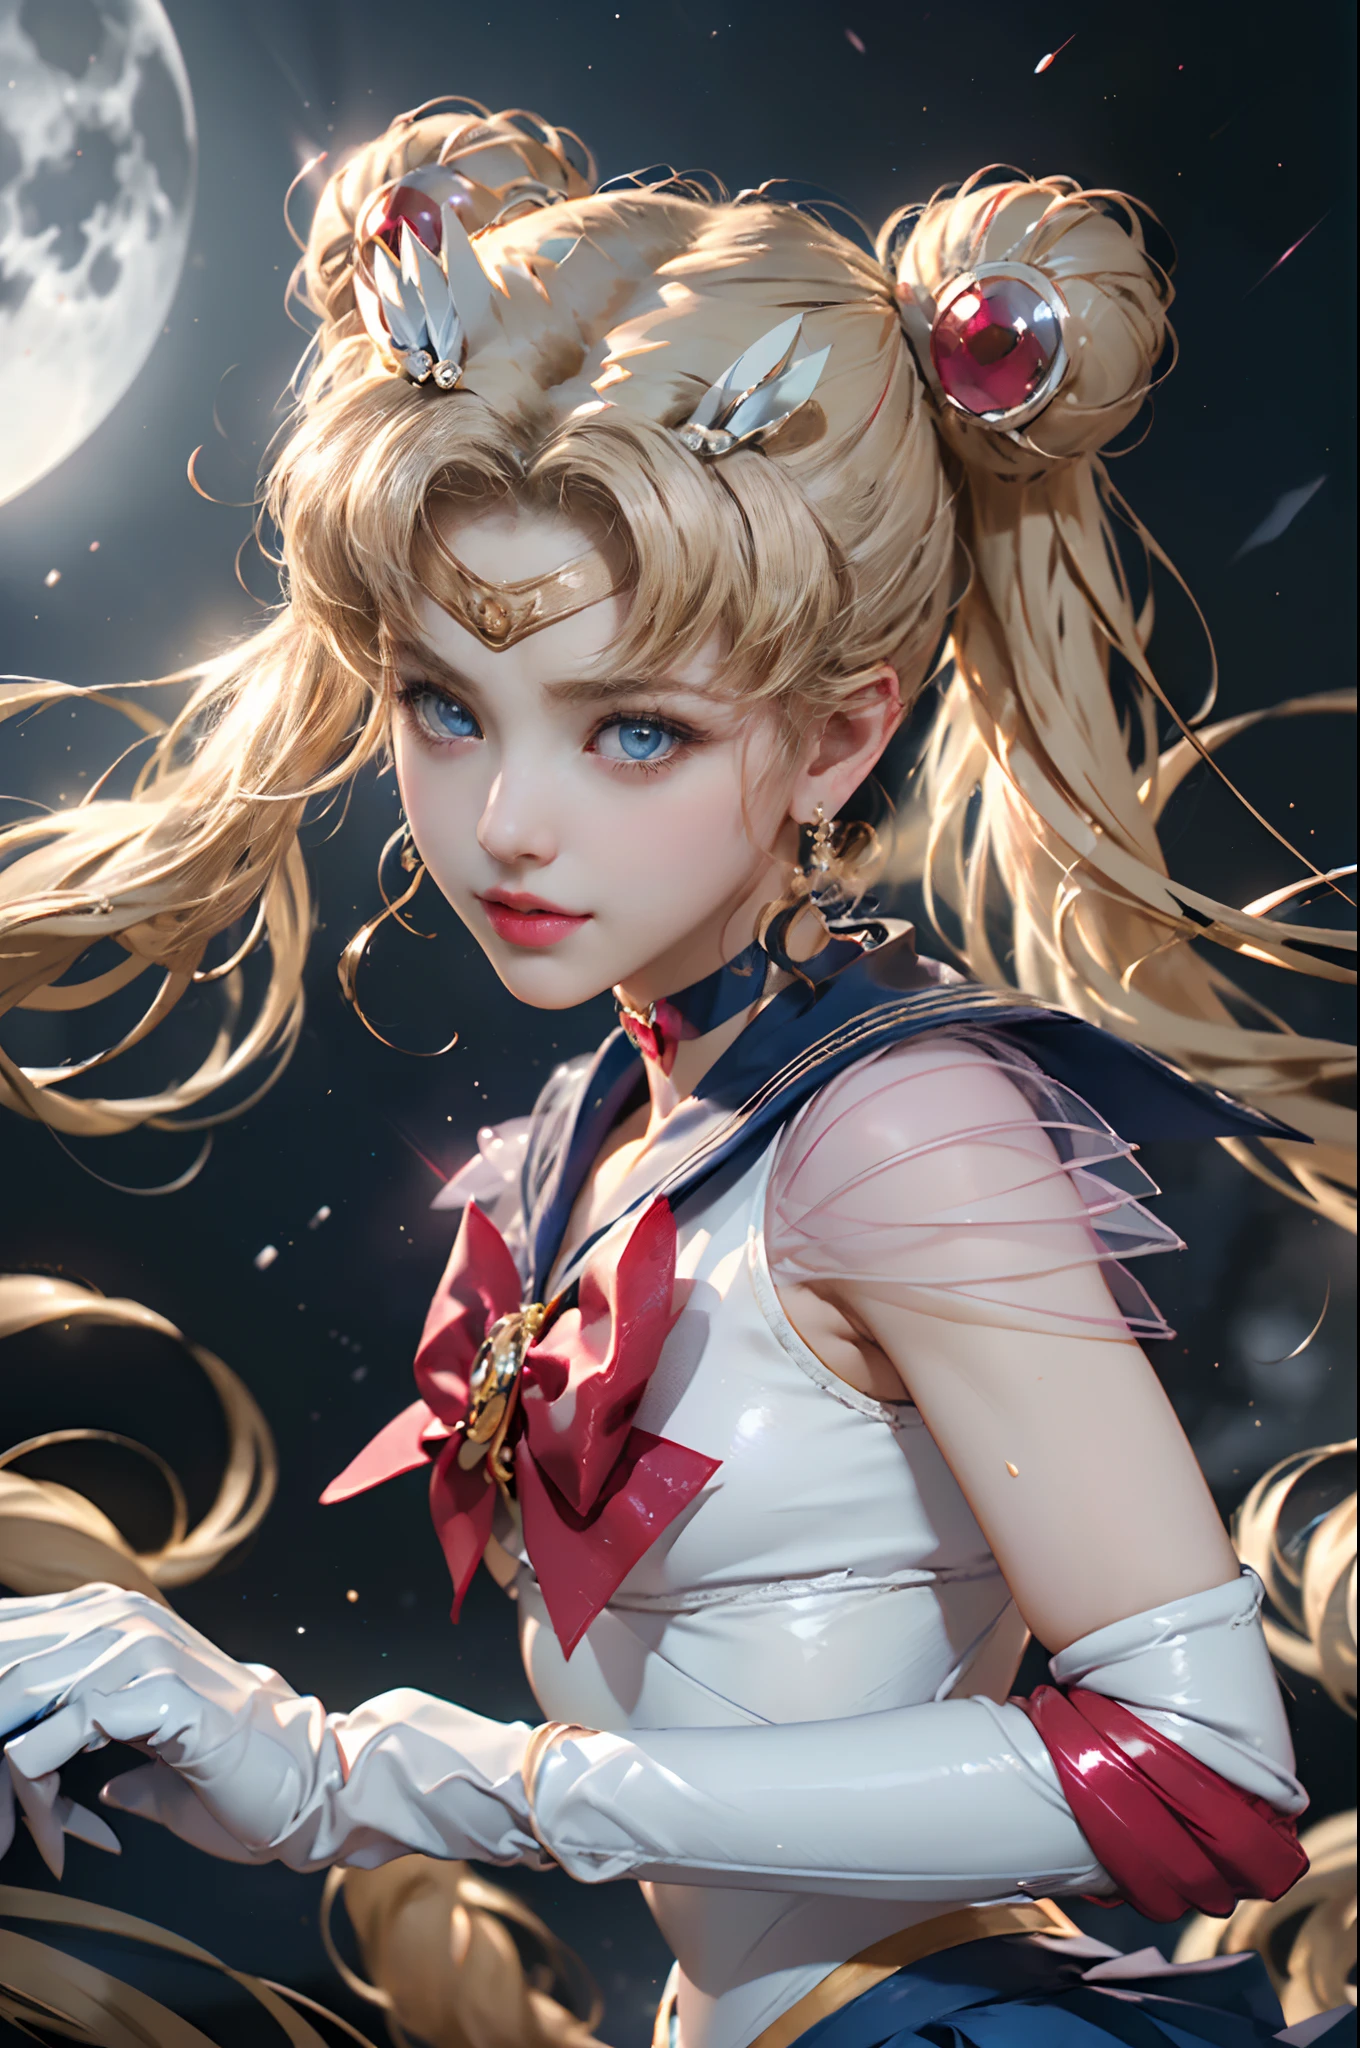 ​masterpiece、ful:1.3、stands、8K、3d、realisitic、Ultra Micro Photography、top-quality、Wallpapers with extreme details CG Unity 8K、frombelow、intricate detailes、(1 female)、28 year old、(Sailor Moon:1.6 Super Bishoujo Senshi Sailor Moon Mer1、meishaonv,tierra、Sailor Senshi Uniform Sailor:1.5、sailormoon:1.5,Eternal Sailor Moon)、(Incredibly long bright twin-tailed blonde:1.4、Thin and very long straight twin tail blonde, Hair buns、Red round hair ornament in a hair bun)、((Sailor Senshi Uniform:1.4、Blue collar,Blue sailor color,Blue Pregate Ultra Mini Skirt:1.5、very large red bow on the chest,,Long white latex gloves,Red gloves on the elbows、Bare upper arms,Luxurious golden tiara on forehead、耳Nipple Ring,Luxurious Golden Jewelry、high leg swimsuit))、Very thin and fit high gloss white holographic leather、High Gloss White Latex High Leg Swimsuit That Shines Like Oil,(Details of face:1.5、blue eyes、Beautiful expression、beautidful eyes、Outline of the iris, Eyes with highlights、thin lipss:1.5、thin and sharp pale eyebrows,、long eyeslashes、Double eyelashes、Thin, thin and muscular,,,、a small face、tall and large chest、perfectly proportions、big breasts thin waist、SEXY Model Pose、Dynamic Poses,Visible Pore、seducting smile、perfect hand:1.5、octan render、highly dramatic picture、(Lunar divinity,cosmic background、rays of moonlight、a moon、Dynamic backgrounds、exquisite lighting and shadow、dynamic ungle、Detailed background),Strong natural light、sunlights、Digital SLR、sharp focus: 1.0、Maximum clarity and sharpnesecha musume,(honestly, double bun, twintails, parted bangs, circlet, jewelry, earrings, choker, red bow, white gloves, elbow gloves, blue skirt,(honestly, double bun, twintails, parted bangs, hair ornament, circlet, jewelry, earrings, choker, see-through, red bow, white gloves, elbow gloves, multicolored skirt)
)